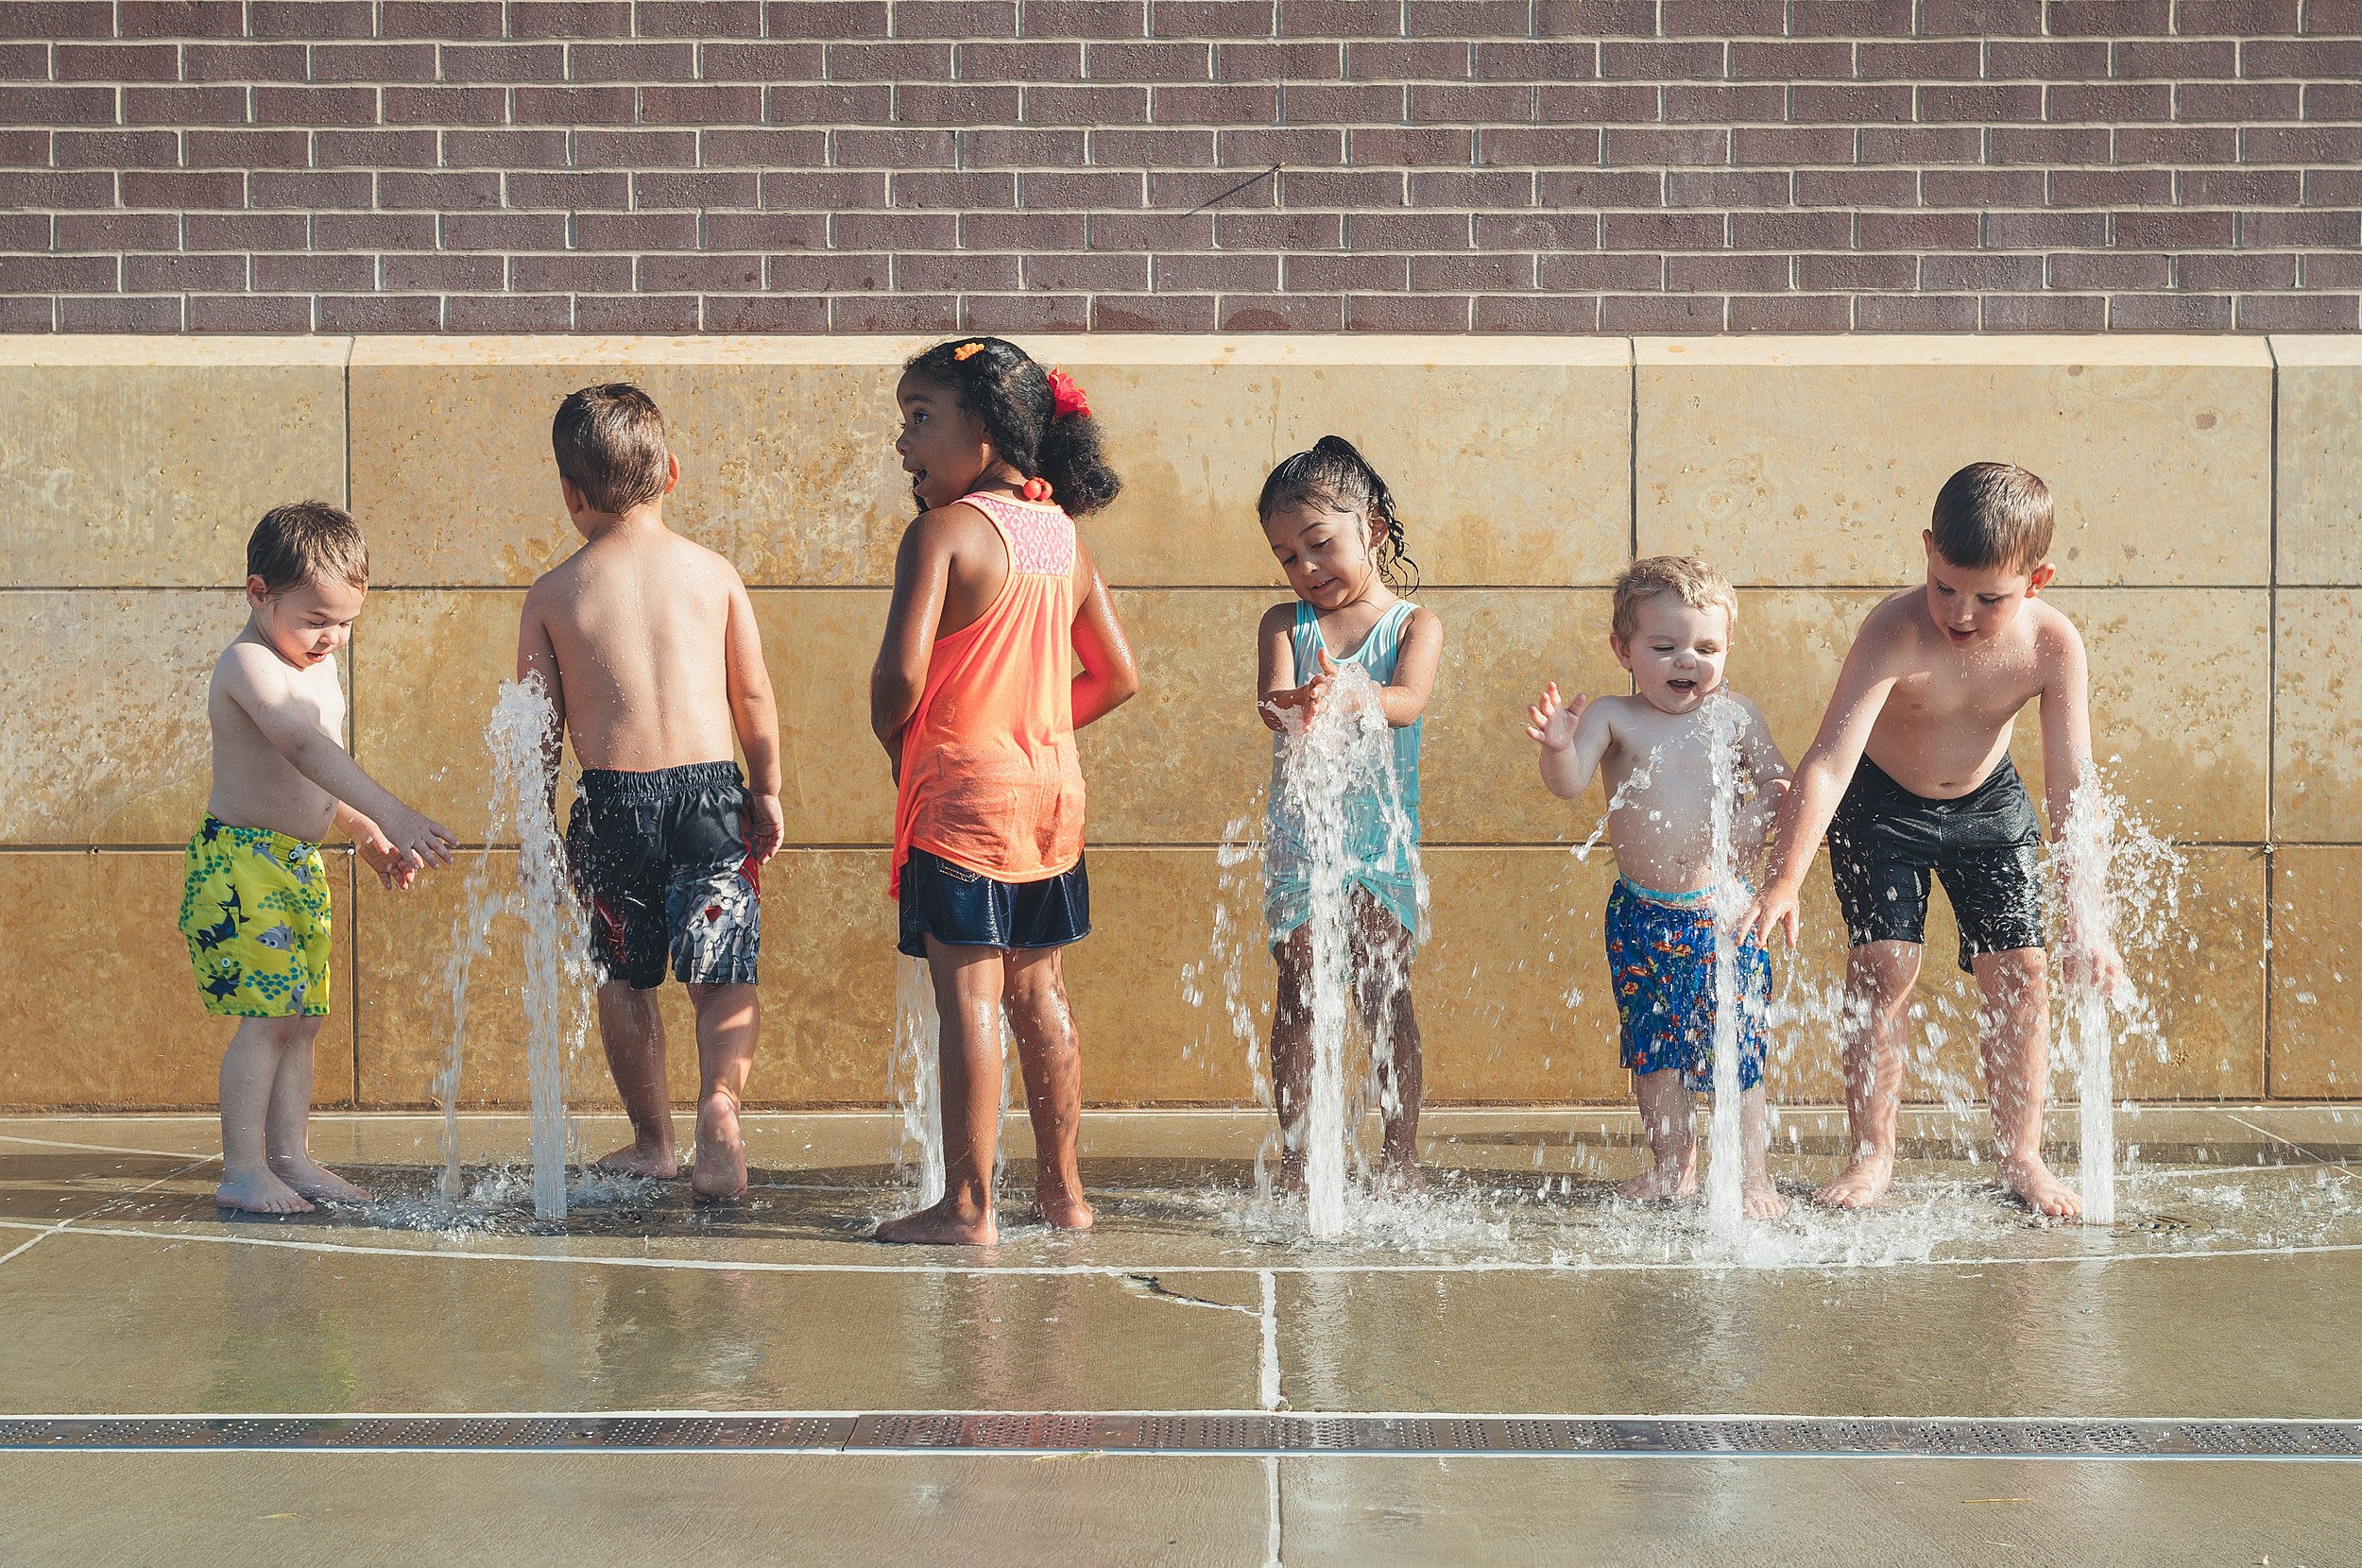 Michigan S Largest Splash Pad Will Keep You Cool This Summer